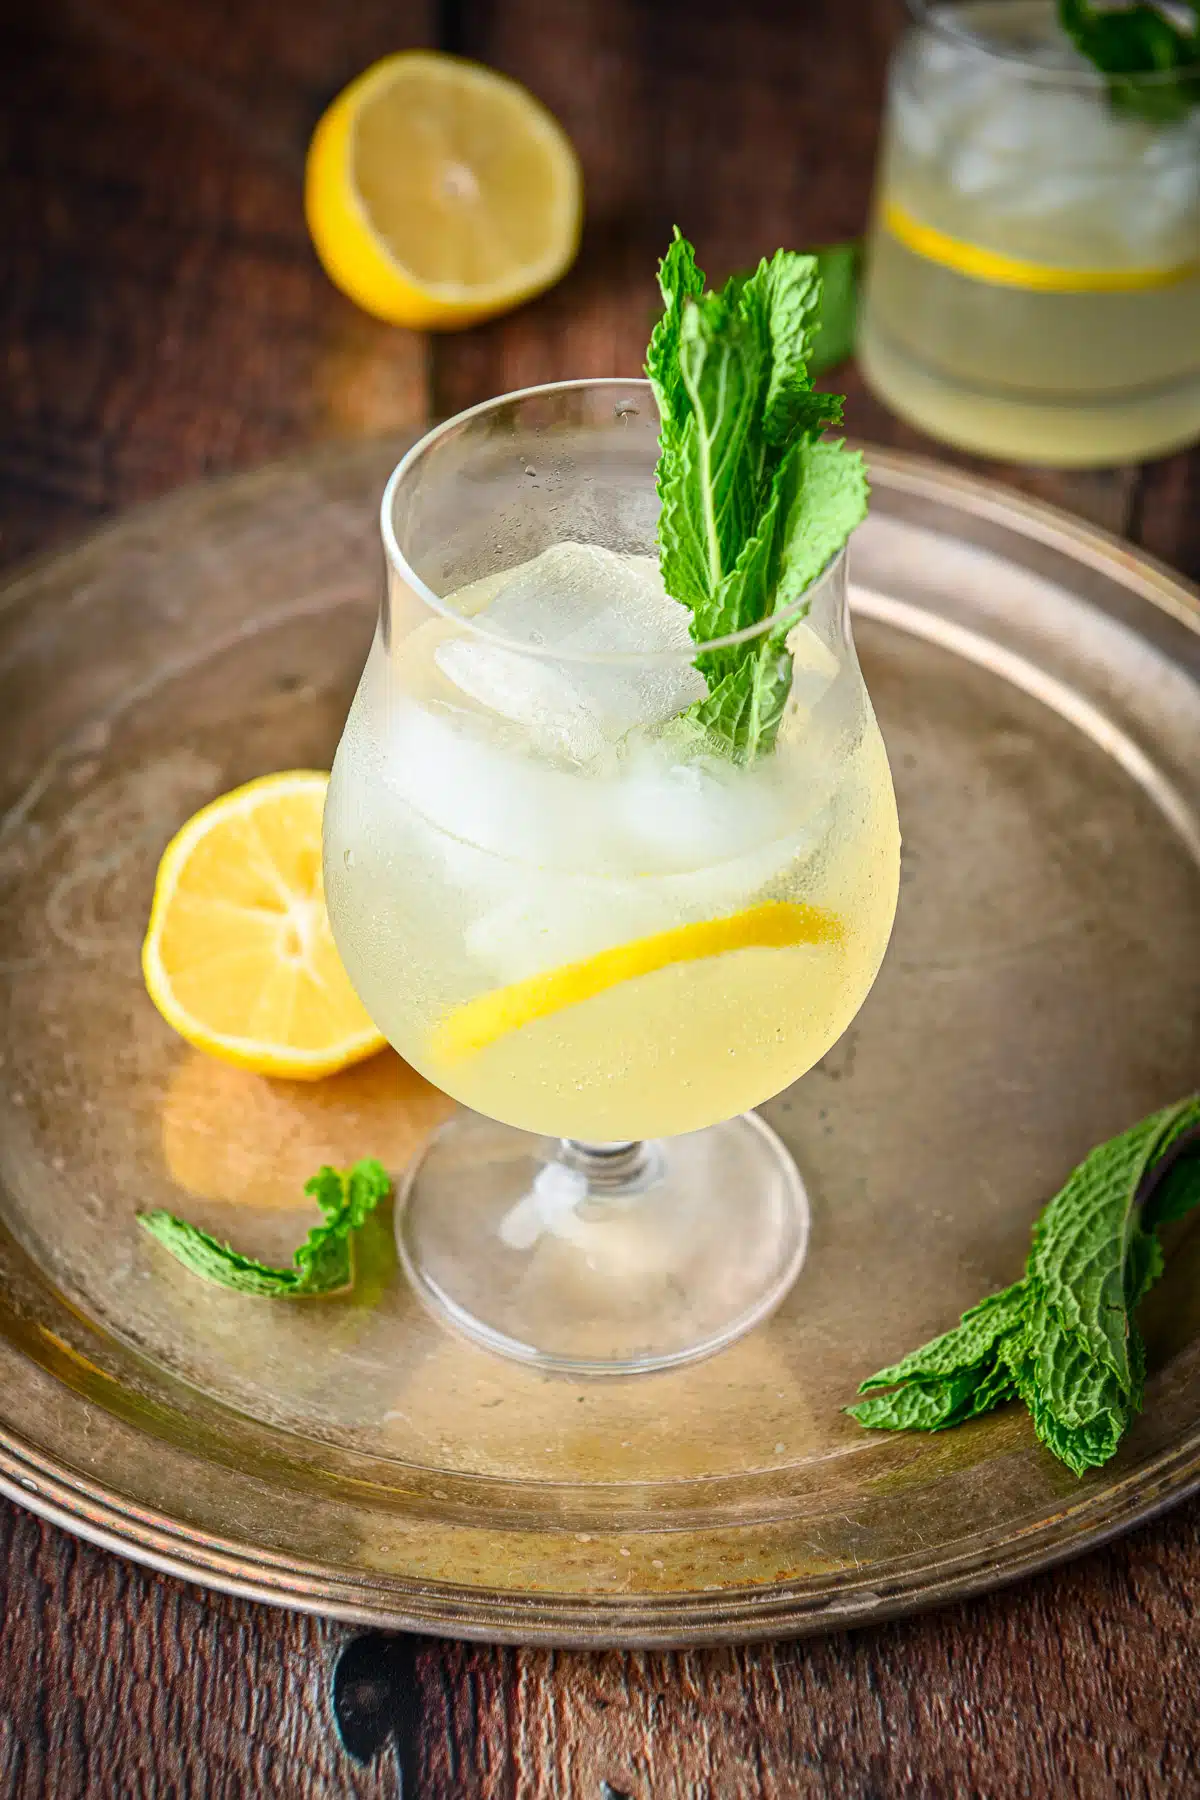 The tulip glass filled with the lemon cocktail on a metal tray with lemon slices and mint leaves